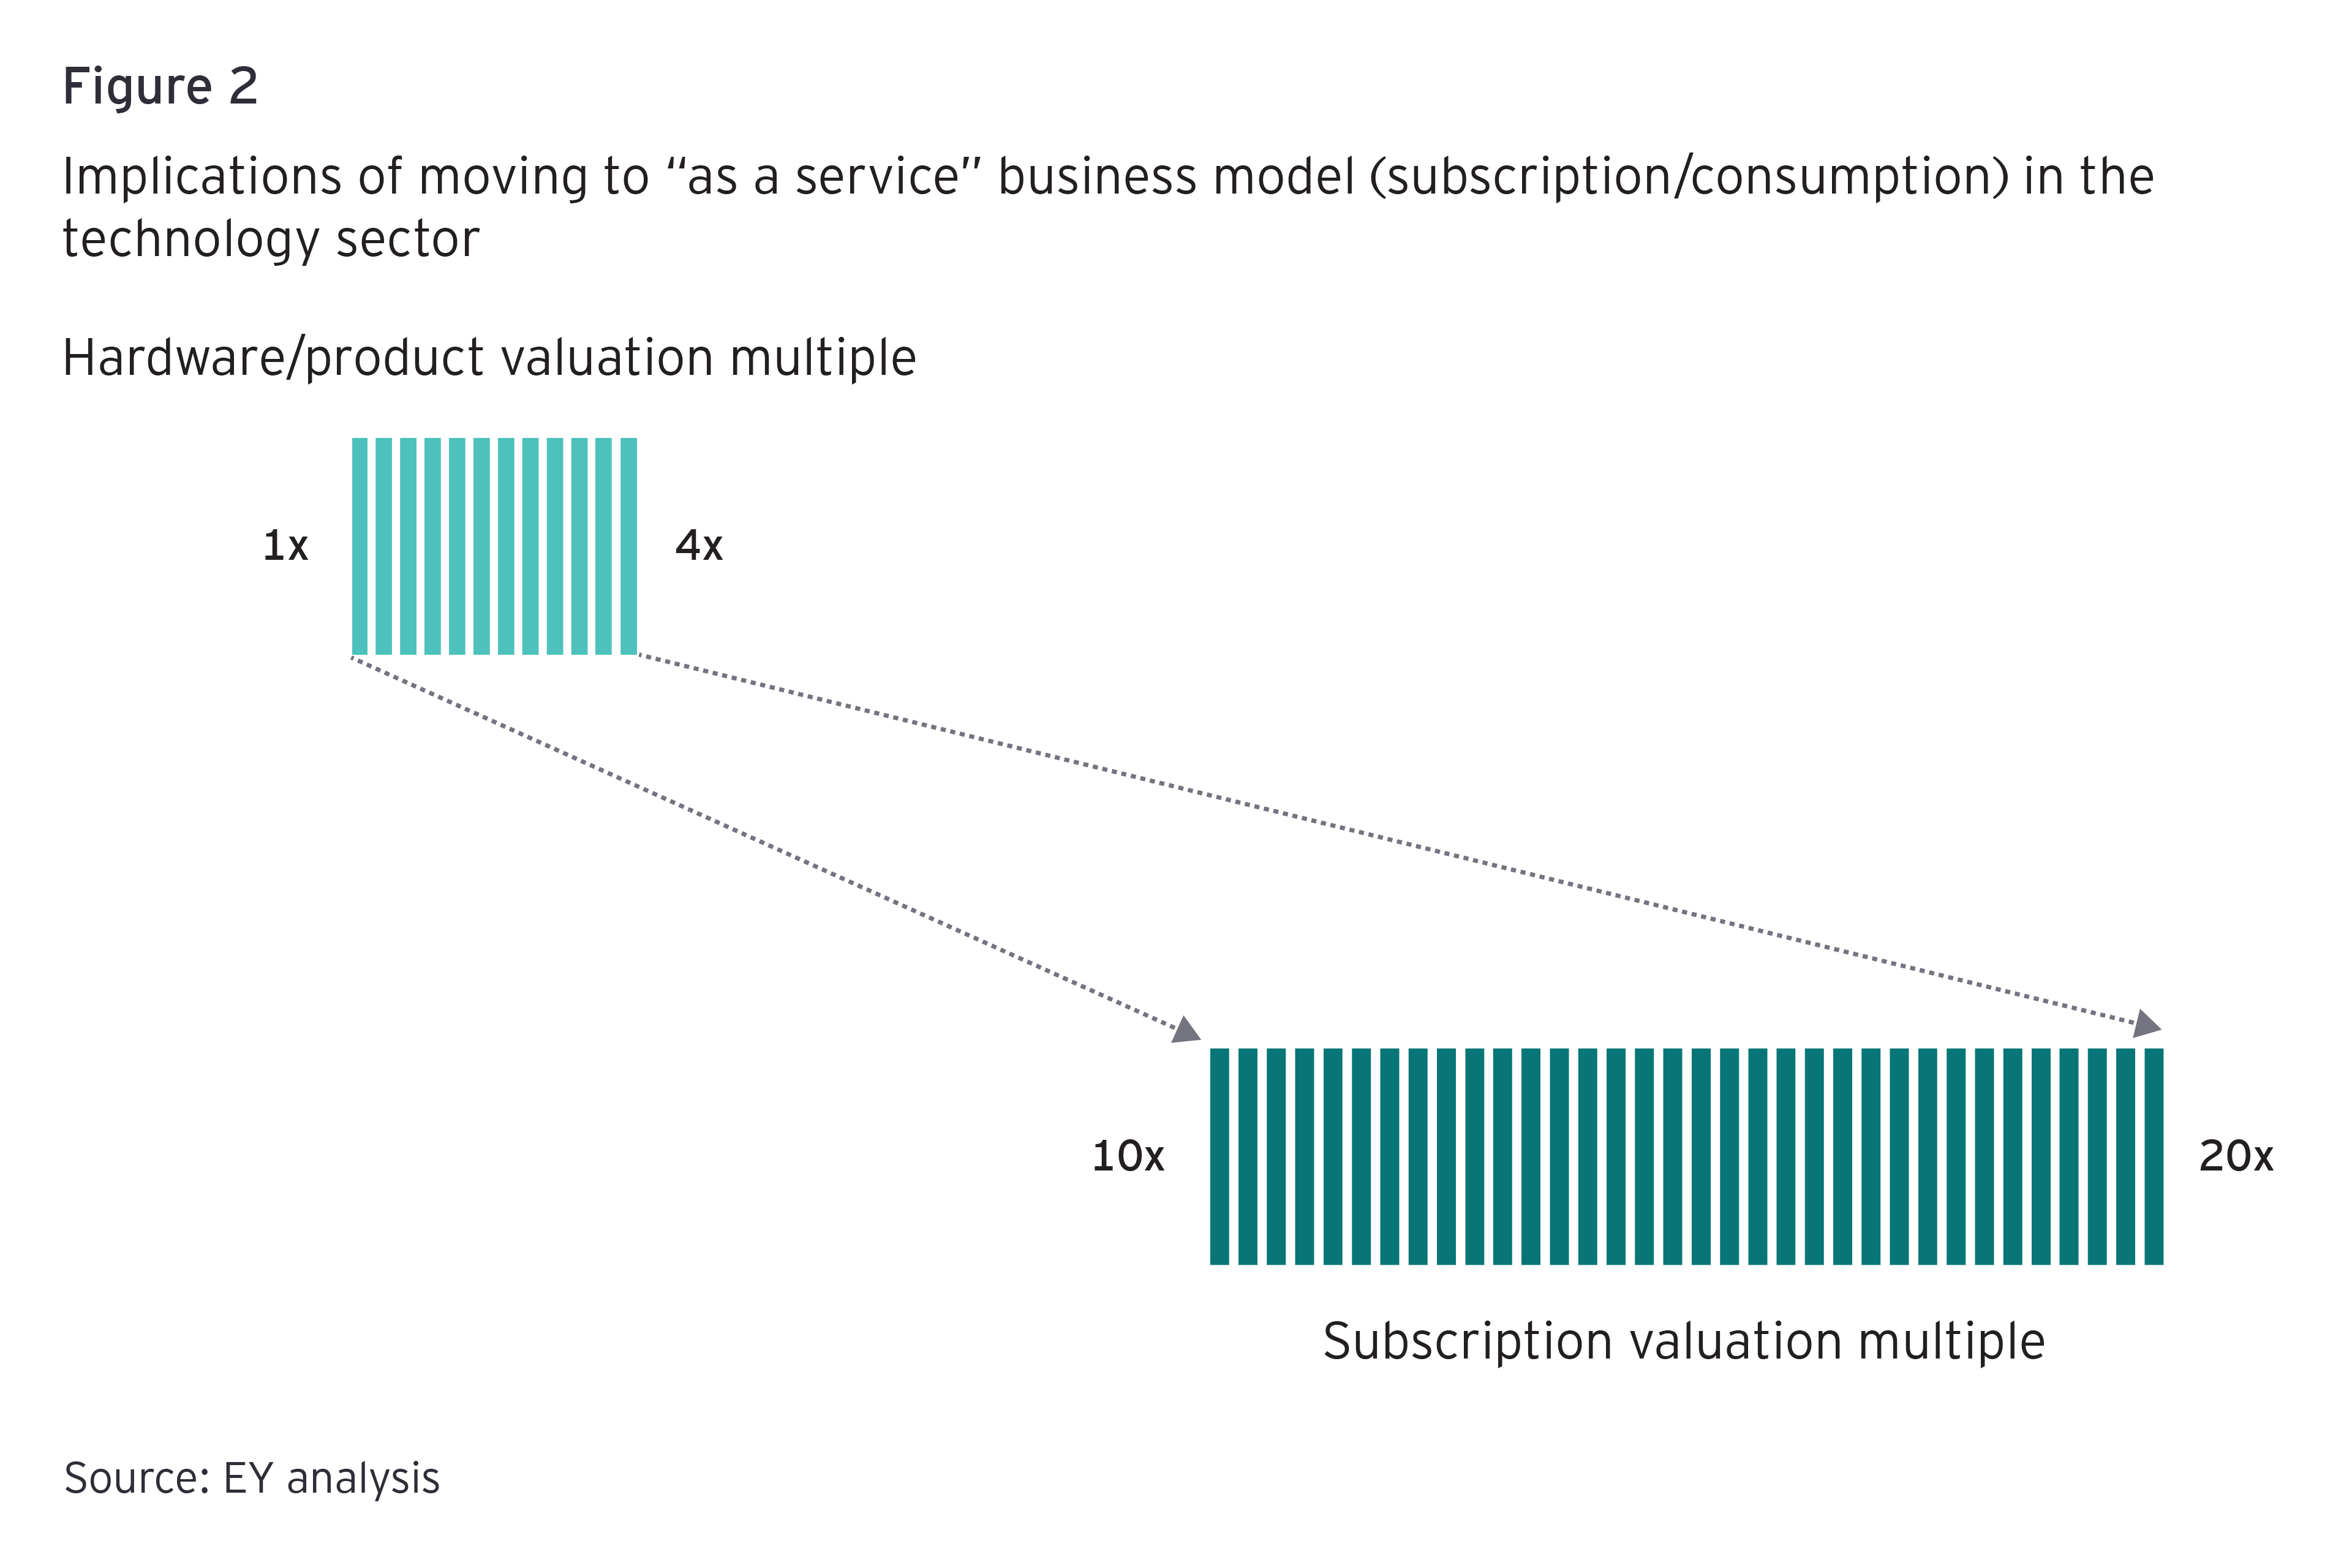 Implications of moving to as-a-service business model in the technology sector 